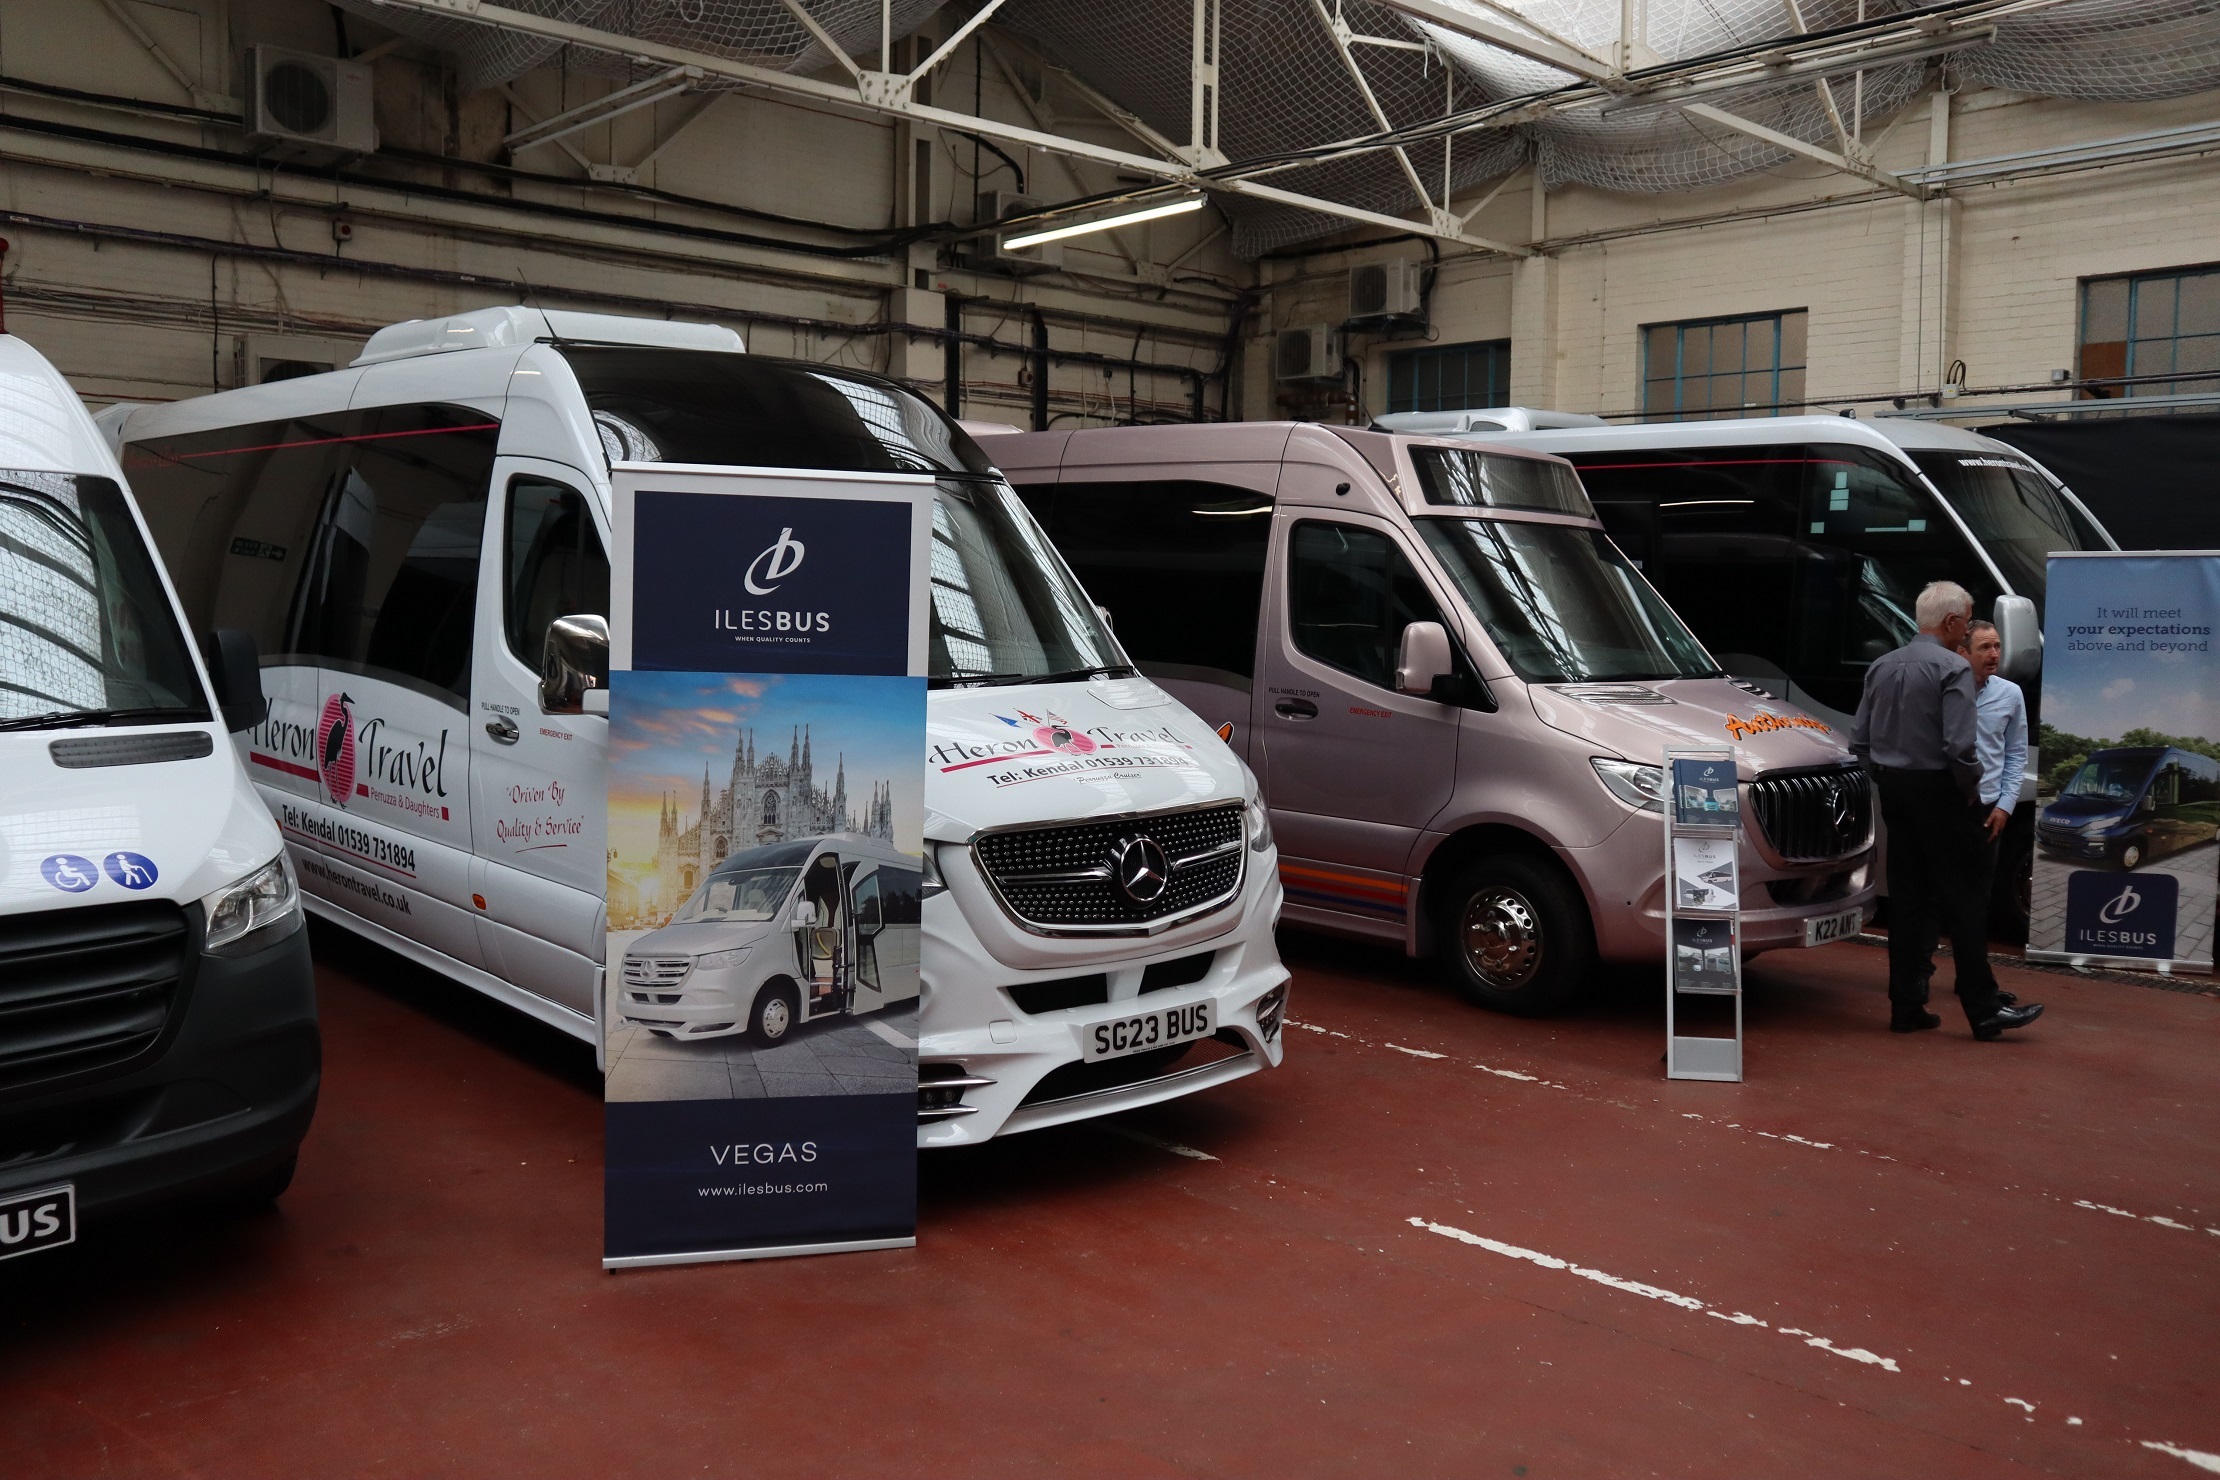 Ilesbus and Temsa report strong response to Coachfest